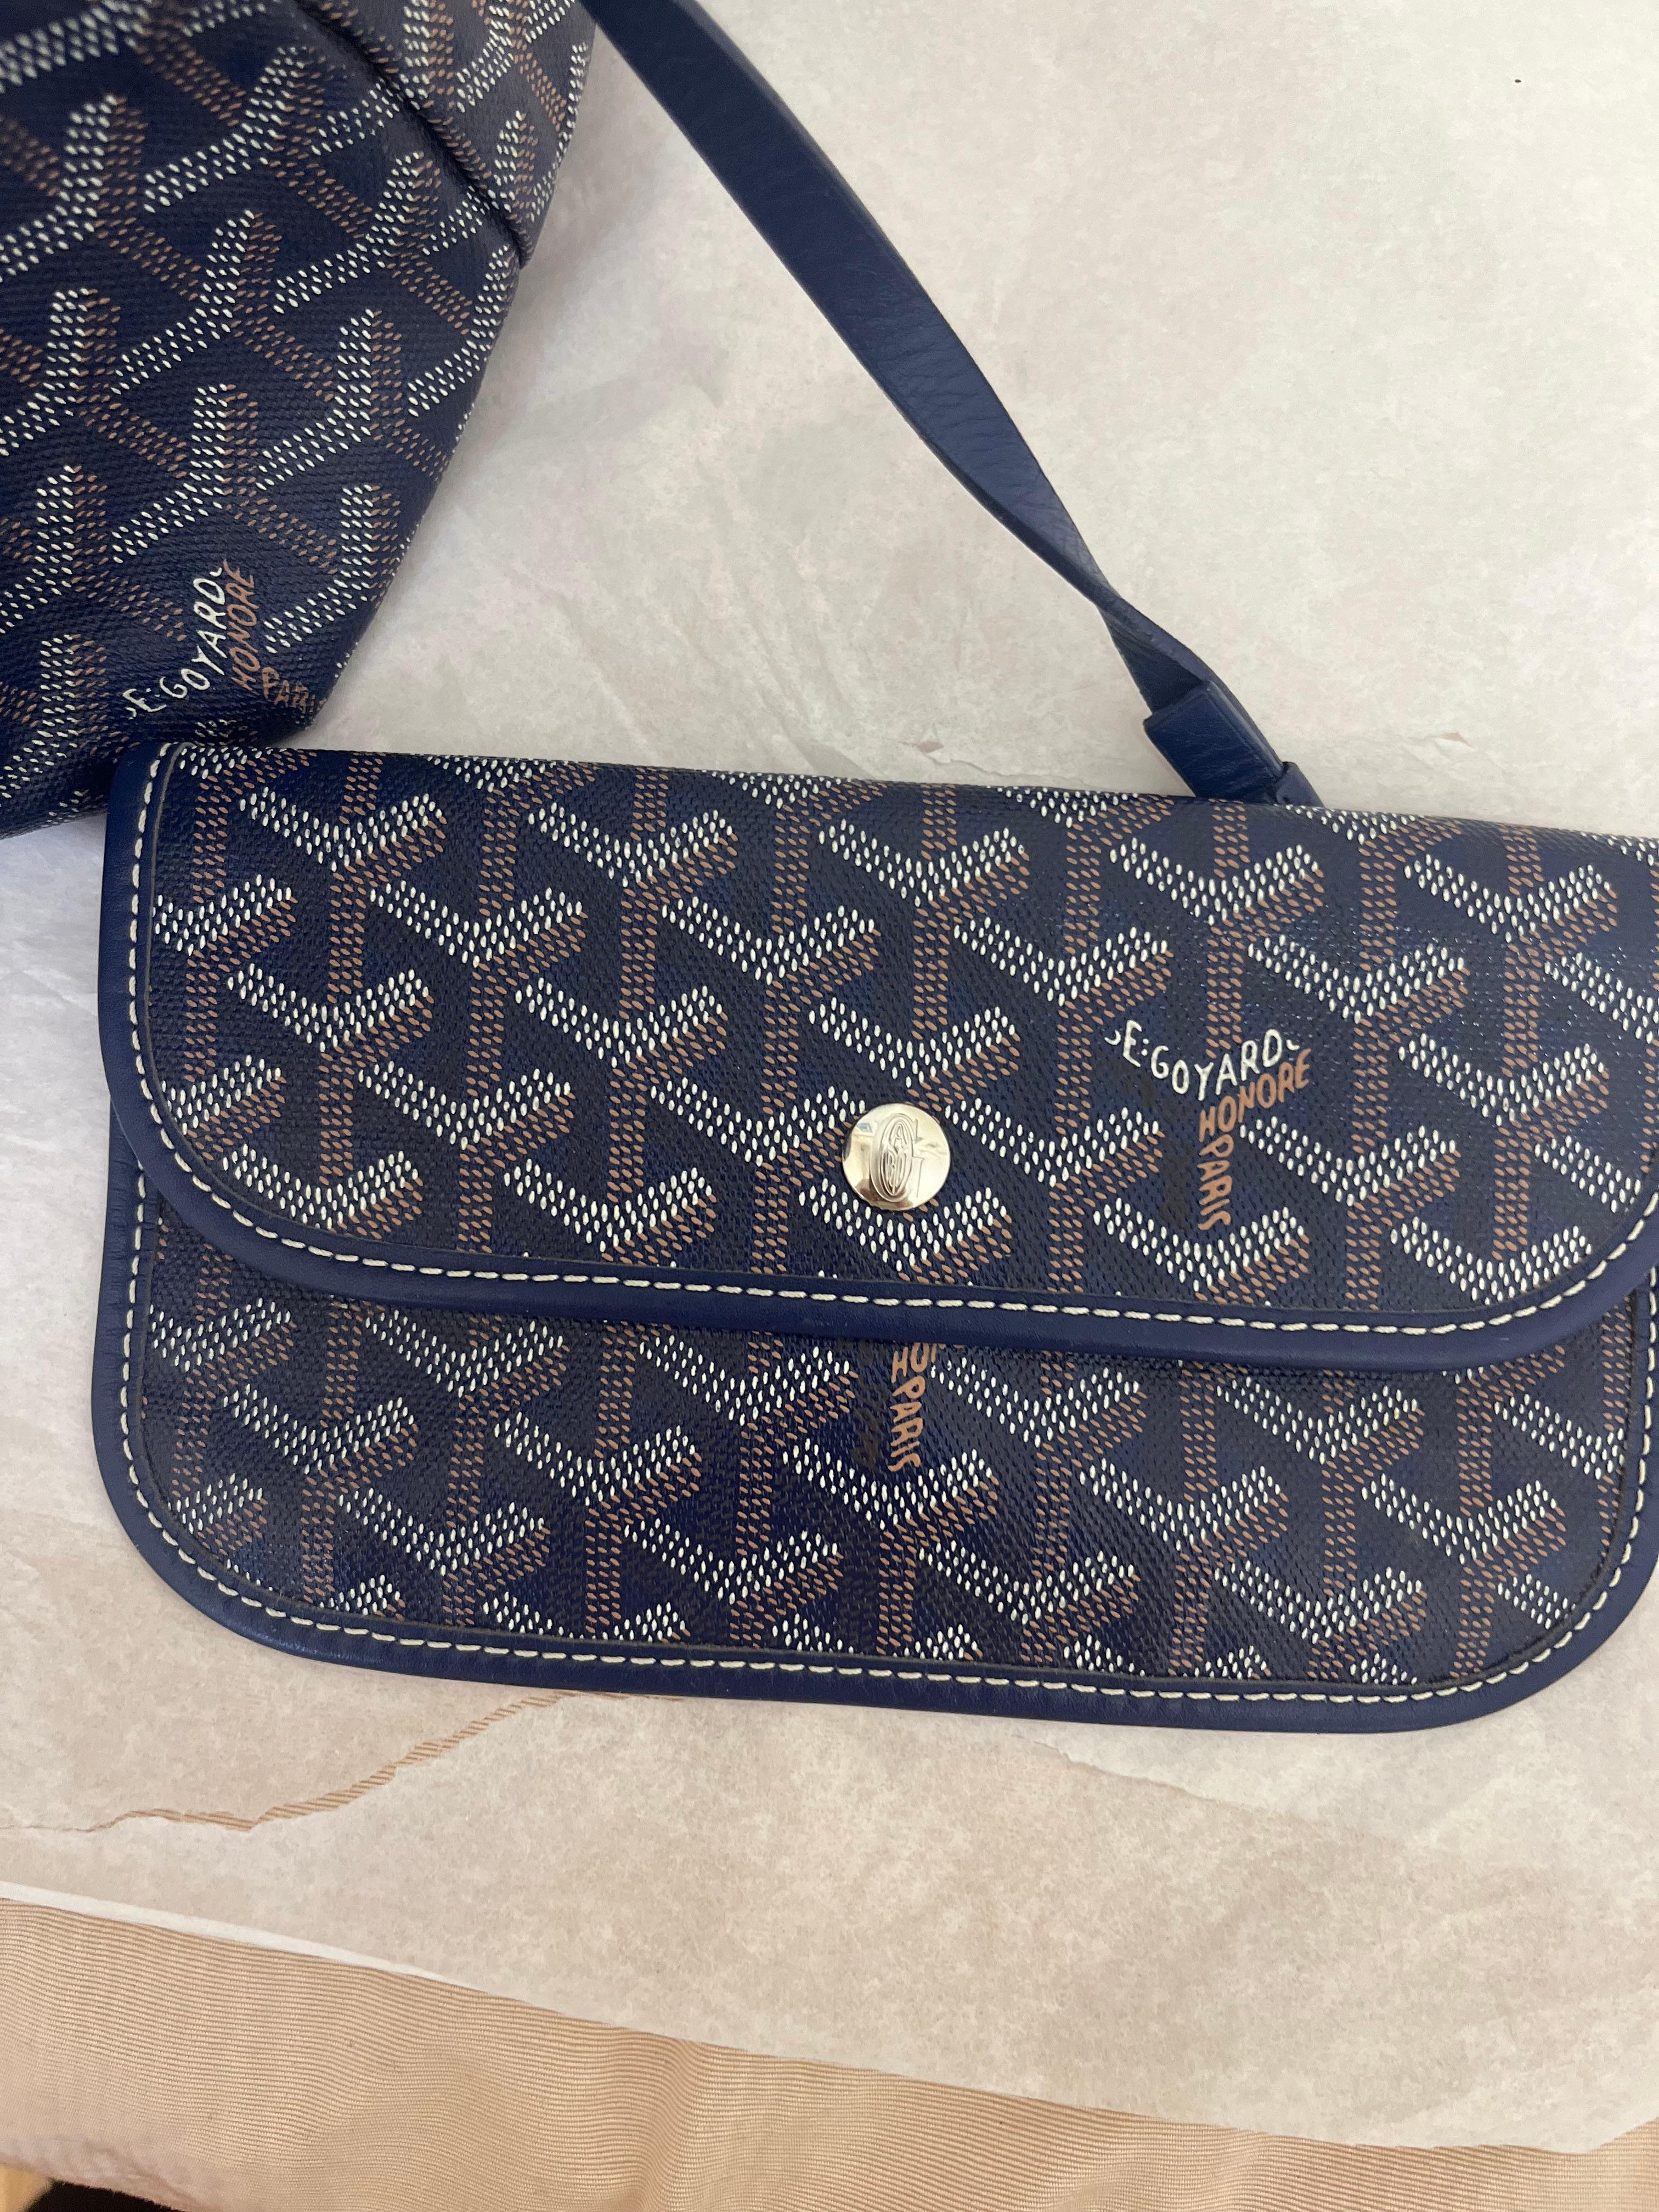 Goyard Saint Louis PM Tote in Blue In Good Condition For Sale In Port Hope, ON